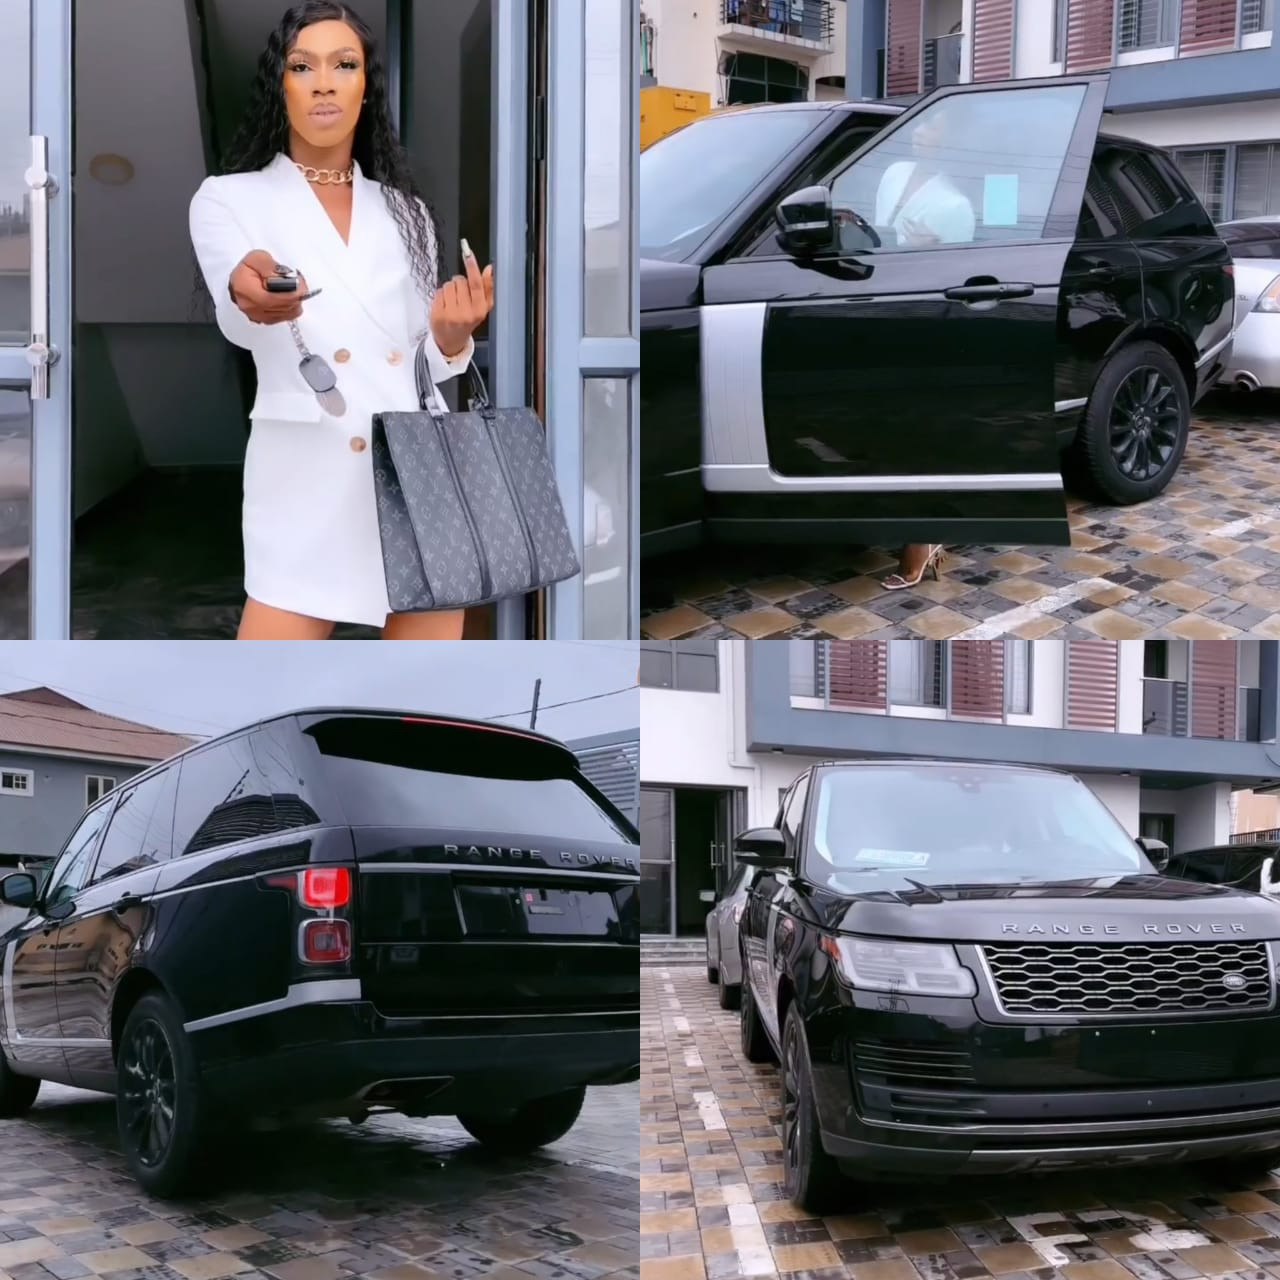 Crossdresser, James Brown, says he just bought himself a Range Rover (video)